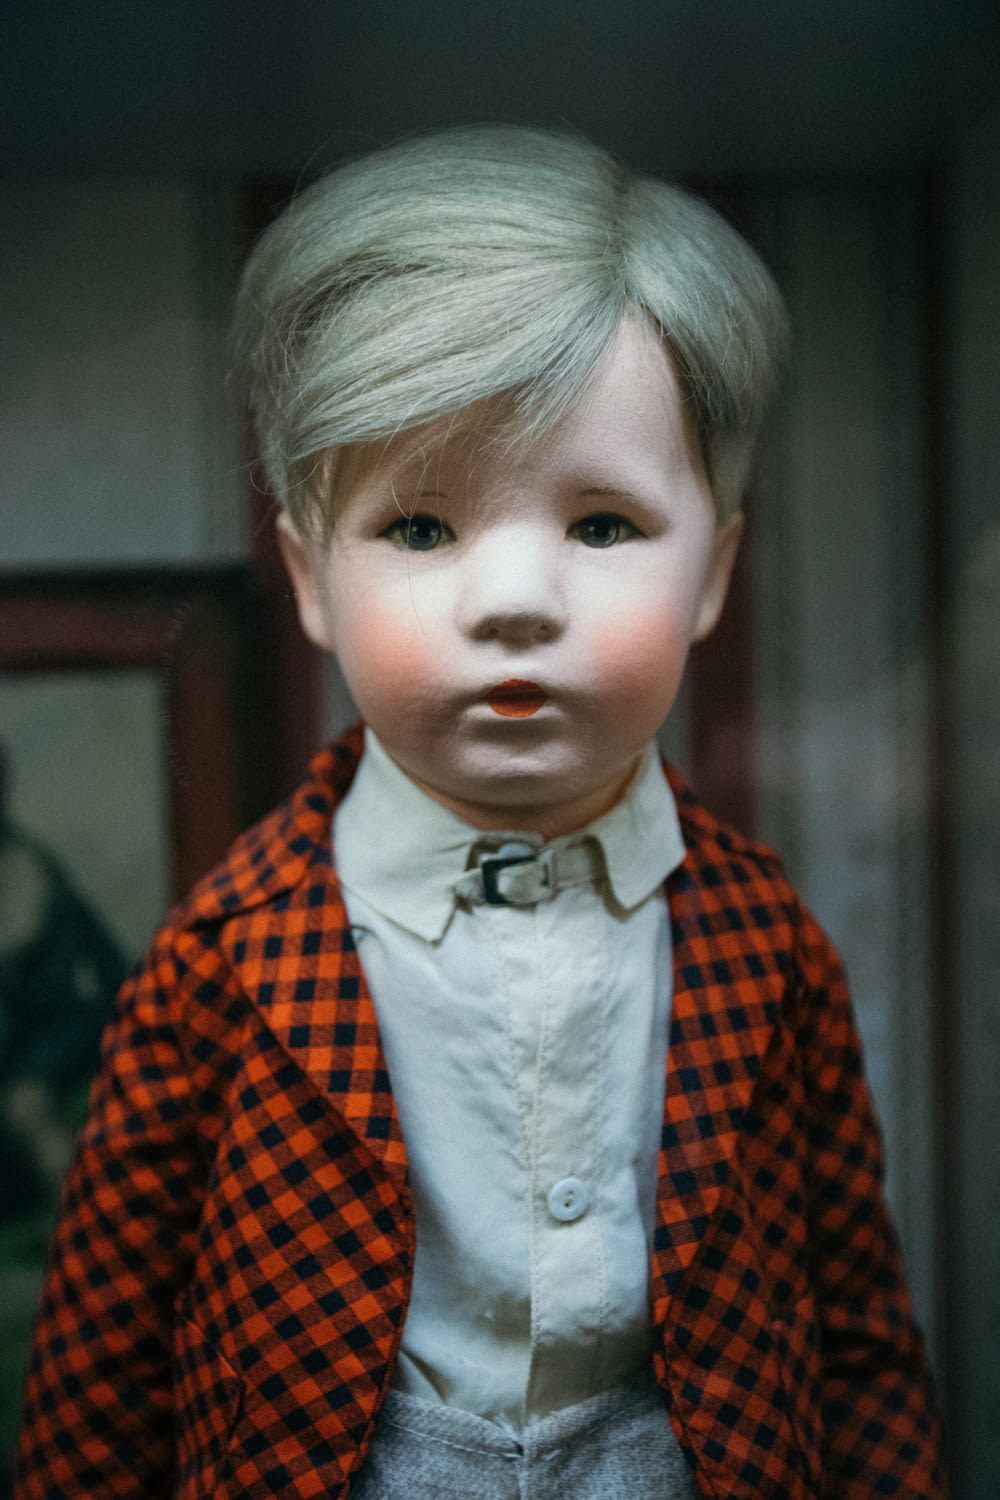 boy doll wearing orange and black checkered top